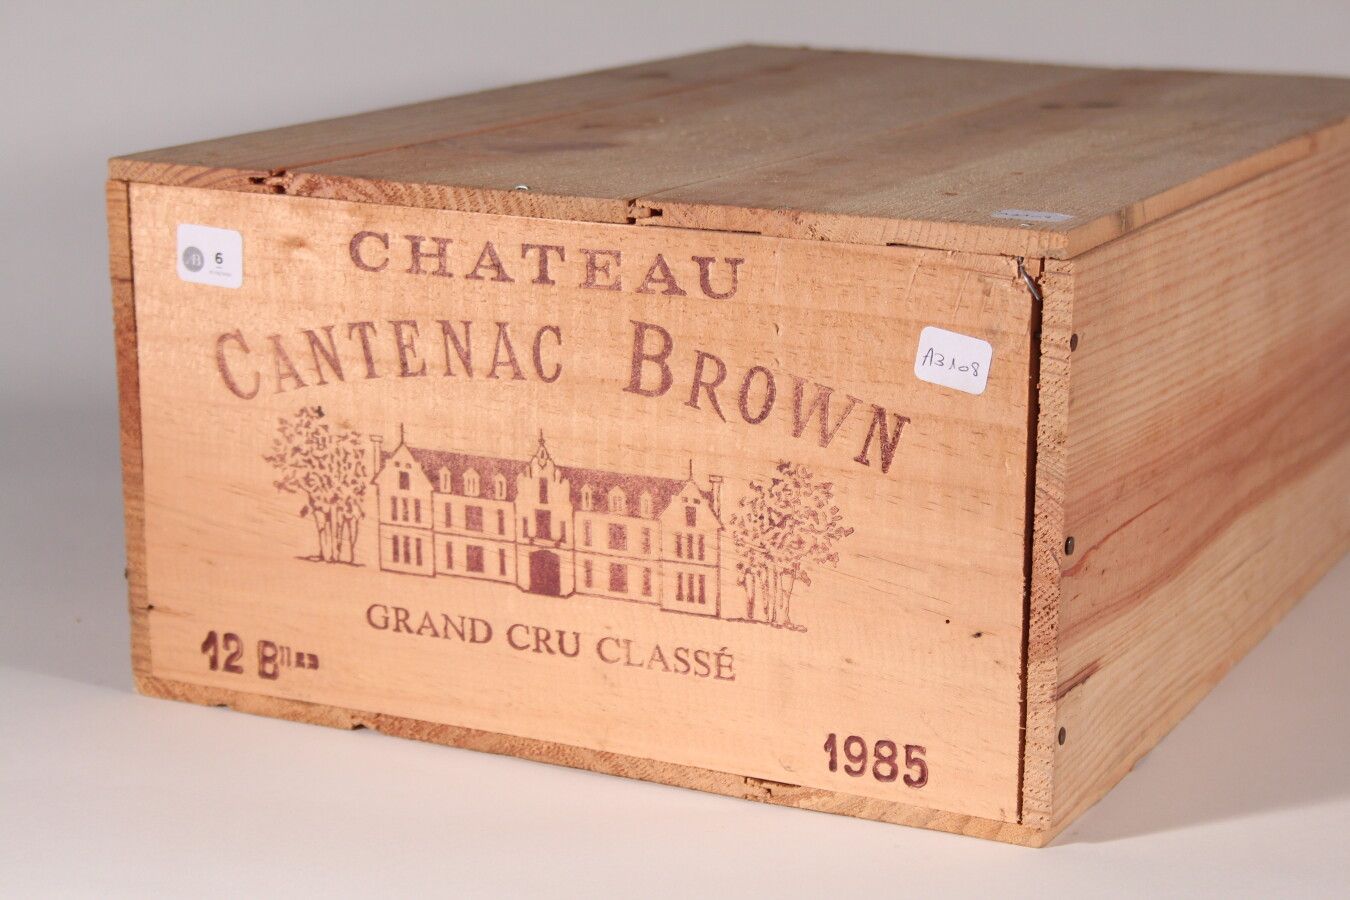 Null 1985 - Château Cantenac Brown

Margaux Rouge - 12 blles CBO